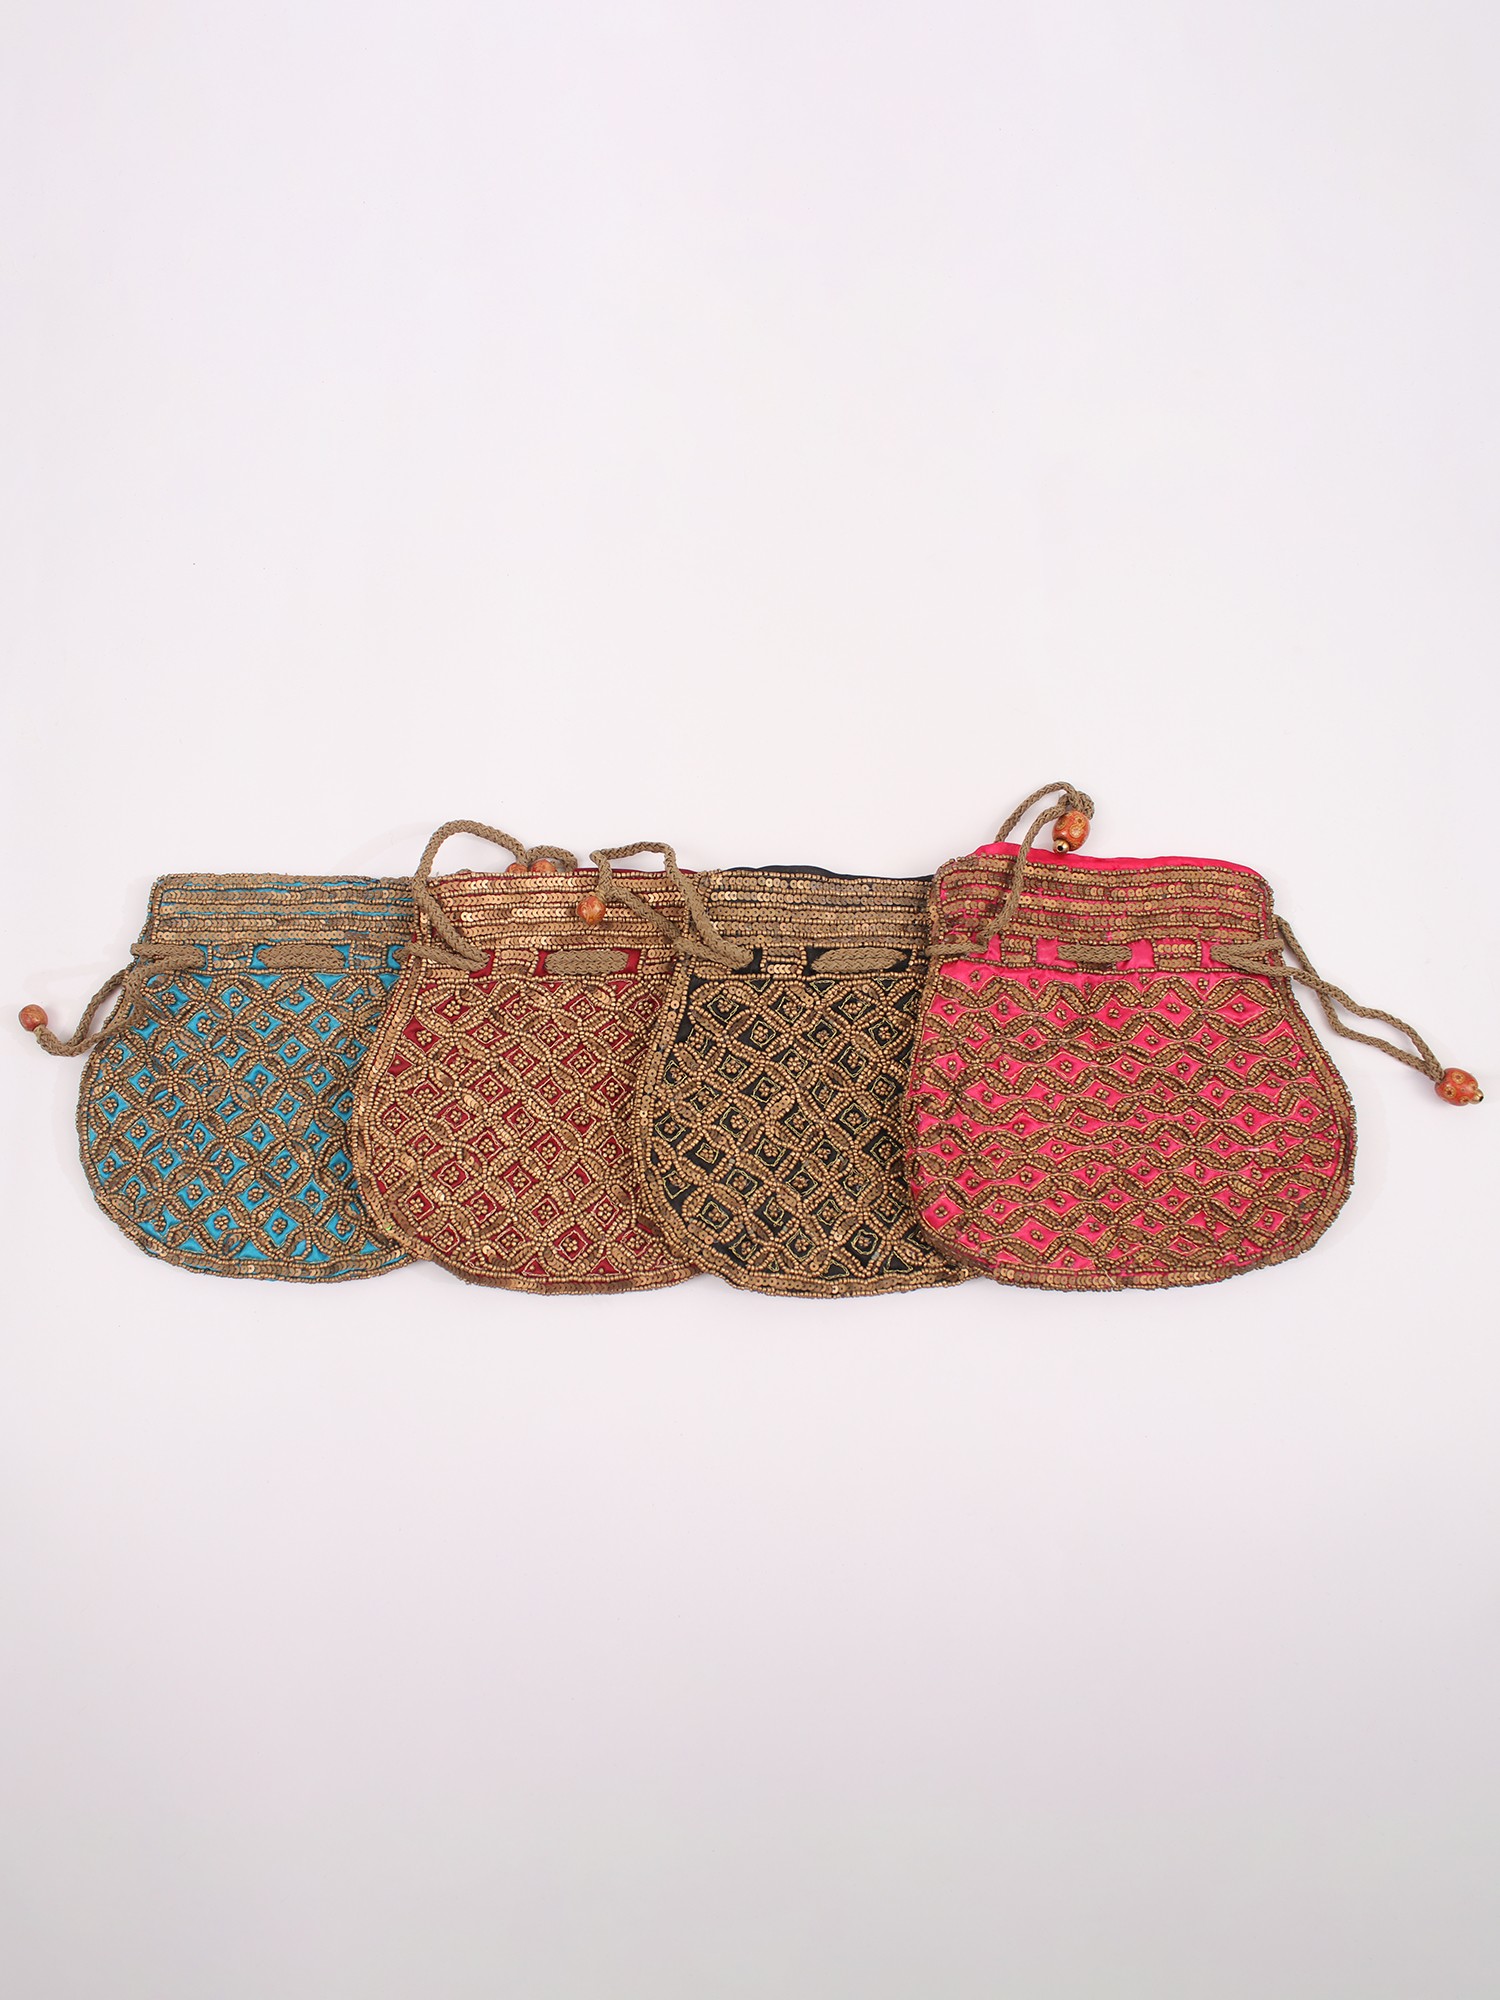 Lot of bags and parts of old bags made of different mate… | Drouot.com